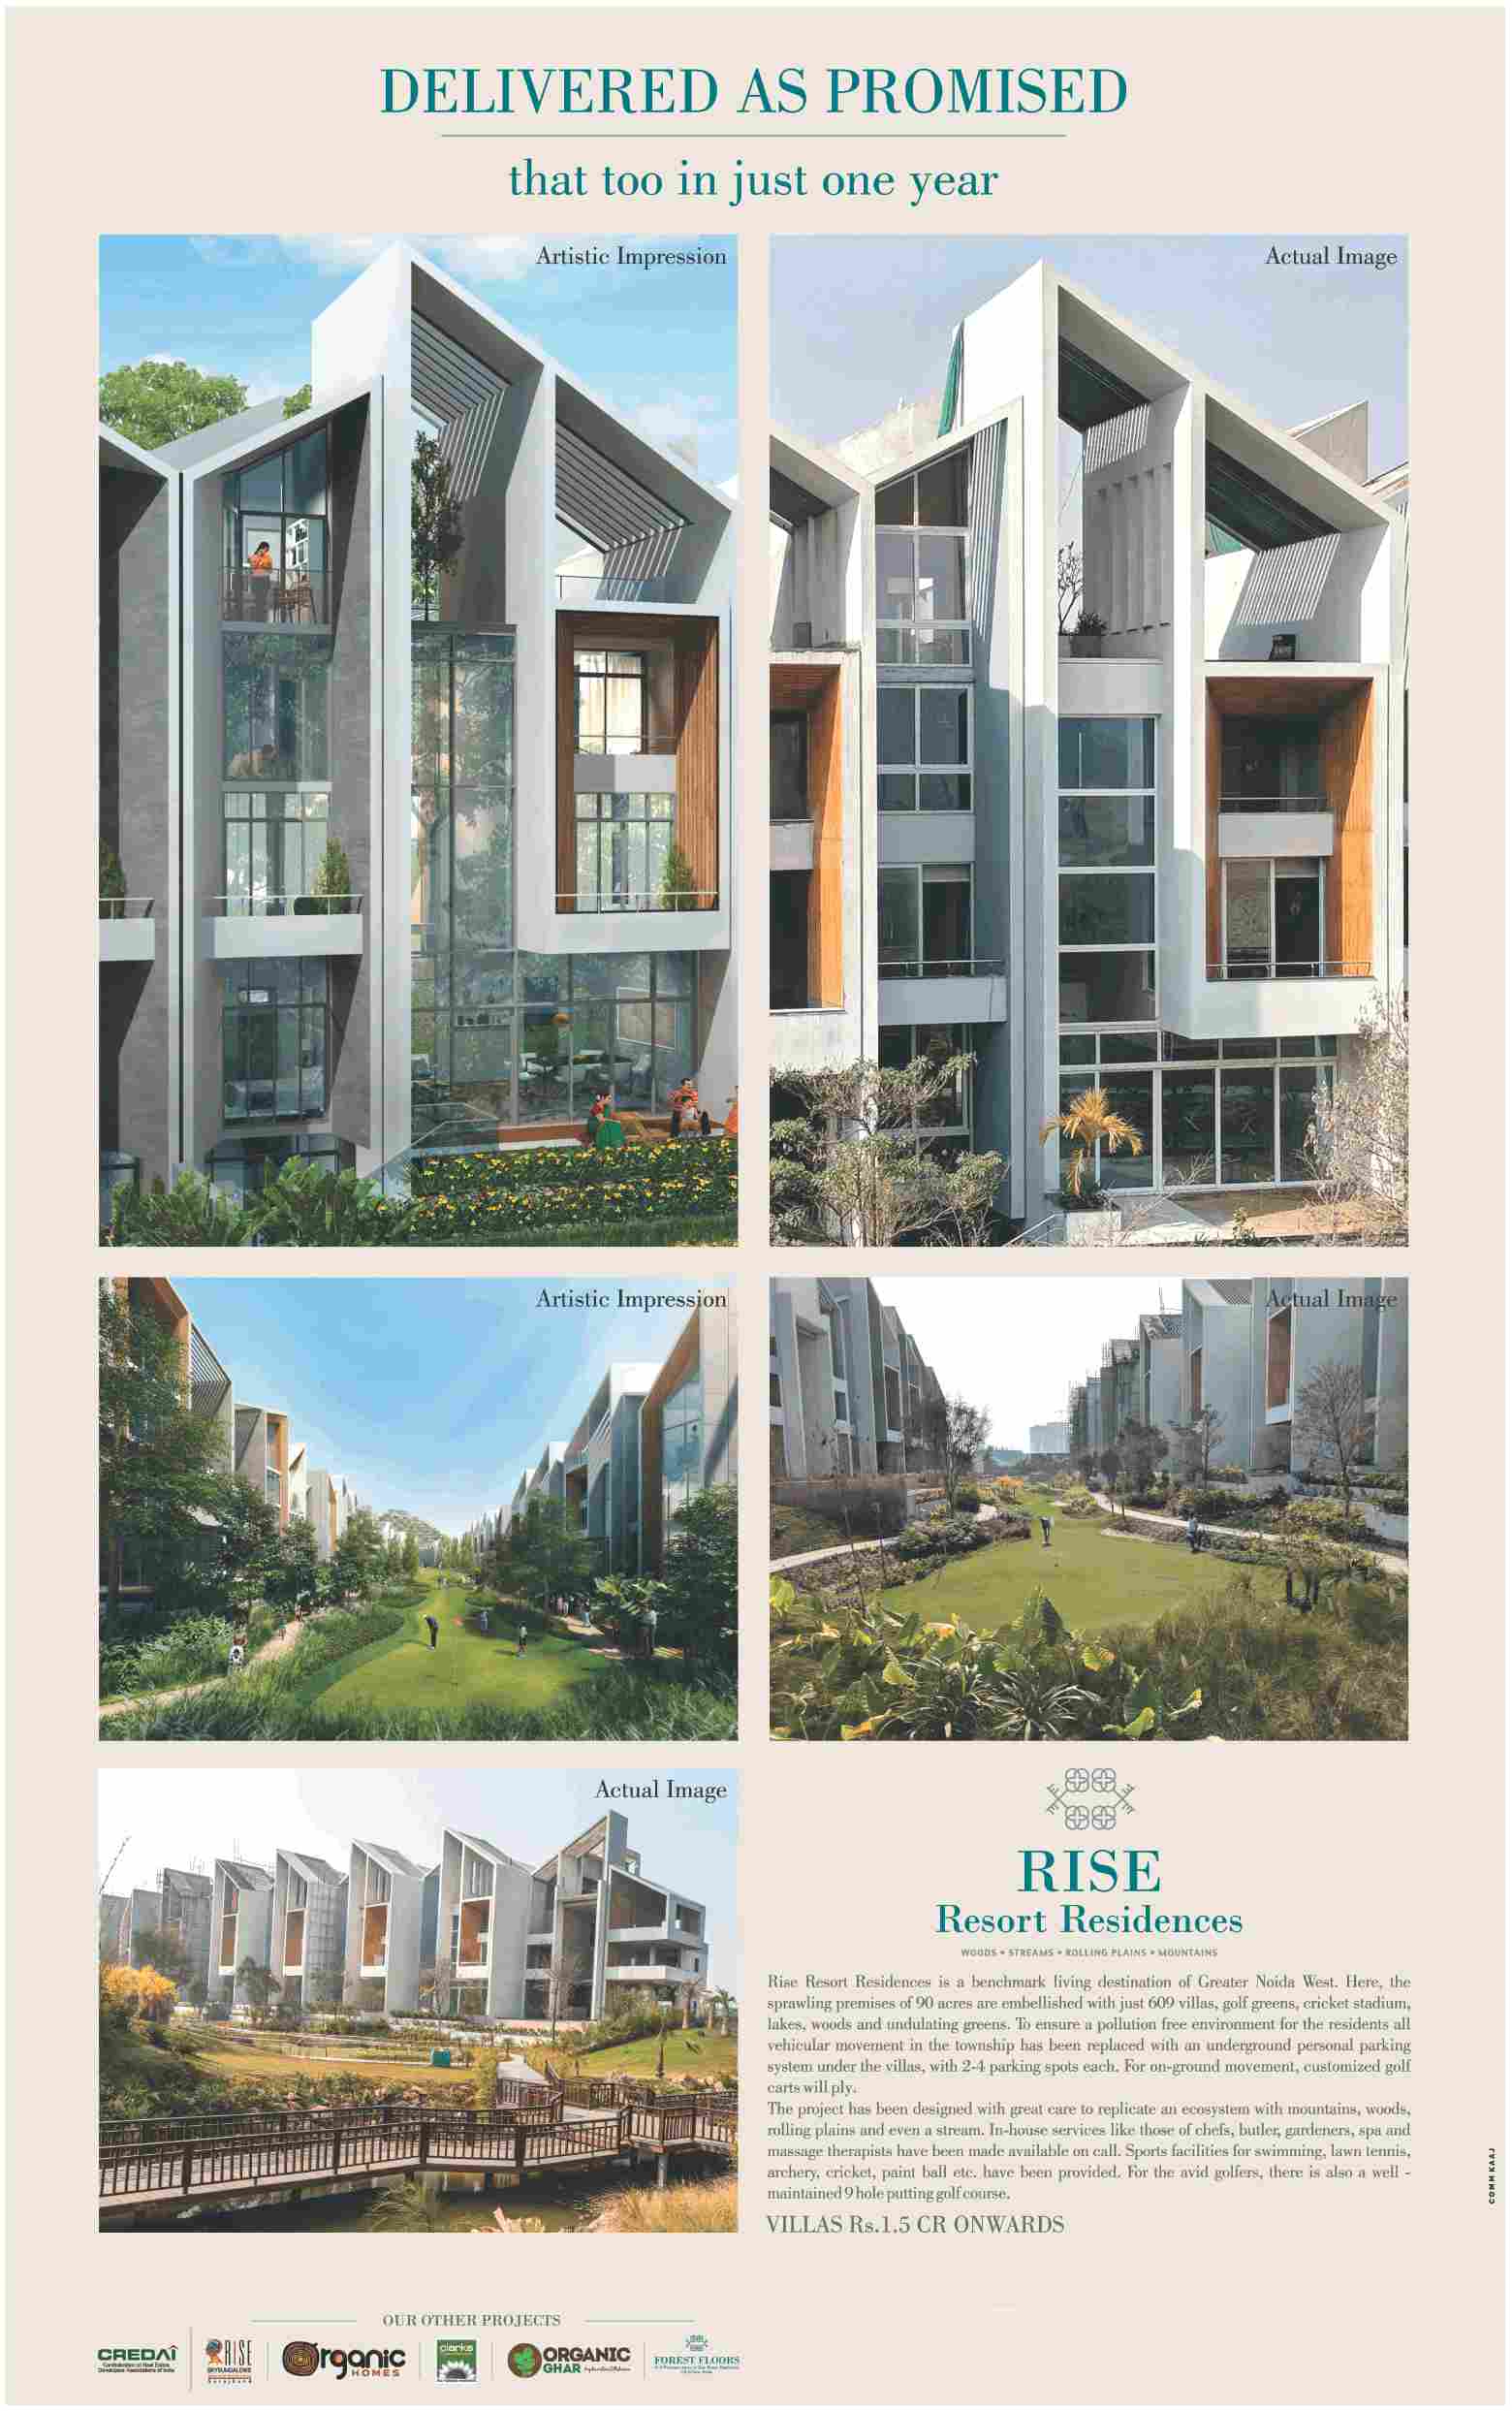 Rise Resort Residences is a benchmark living destination in Greater Noida